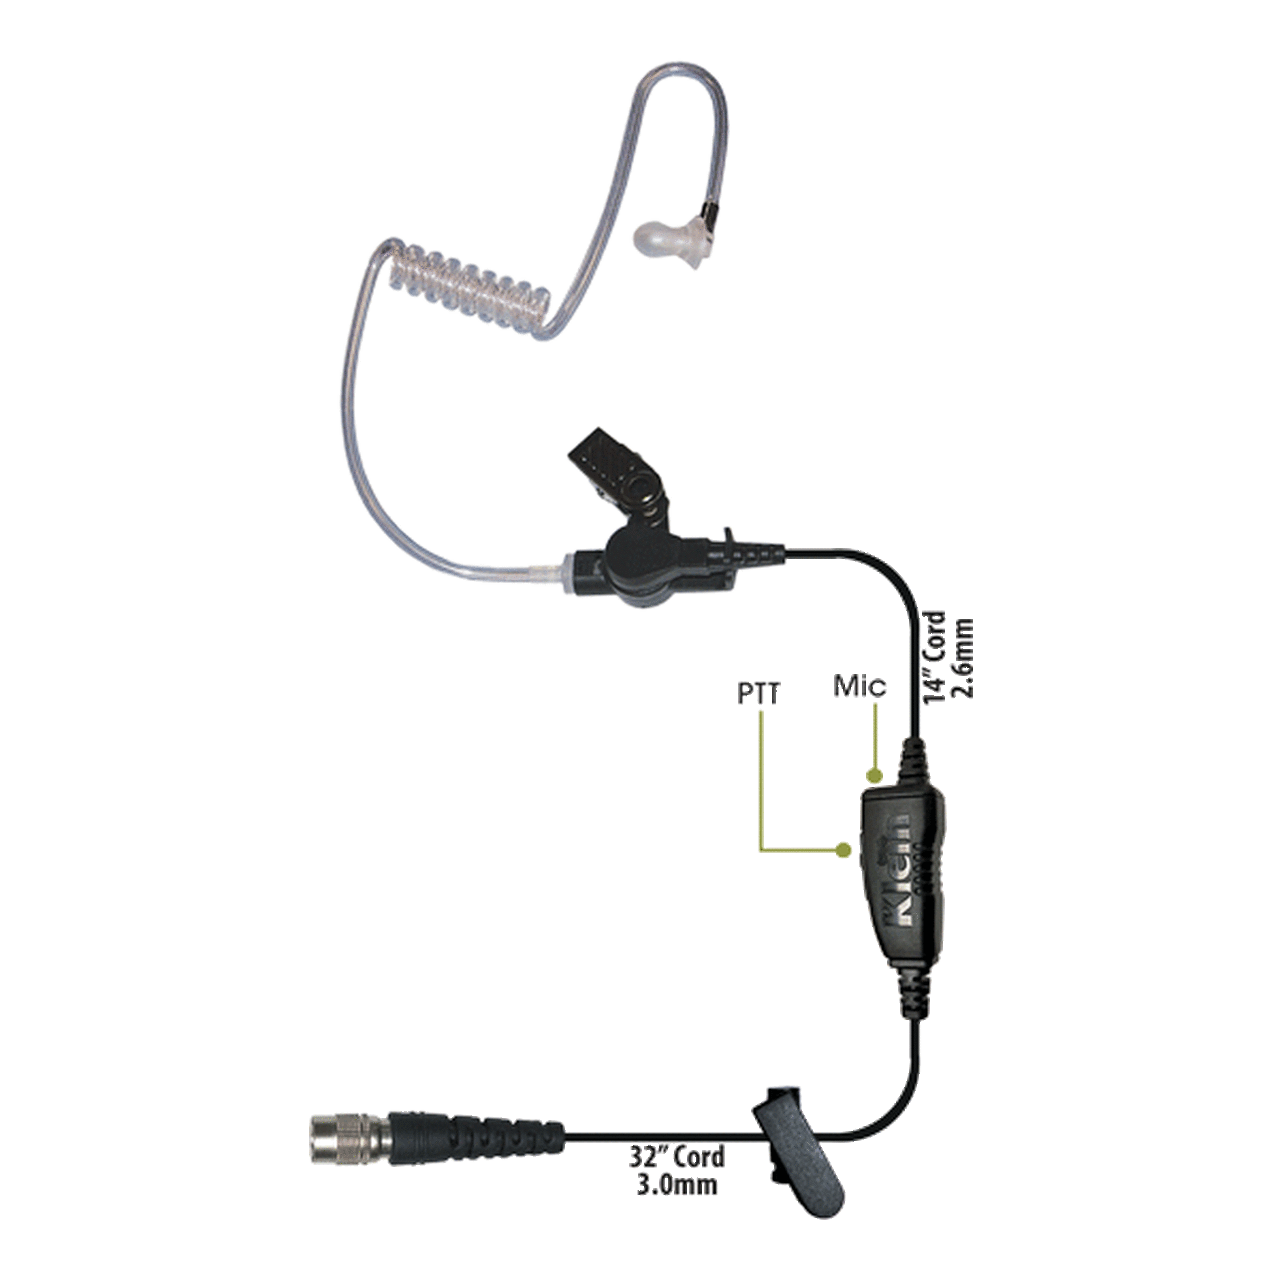 STAR 1-Wire Earpiece Quick-Disconnect [[product_type]] kleinelectronics.com 65.95